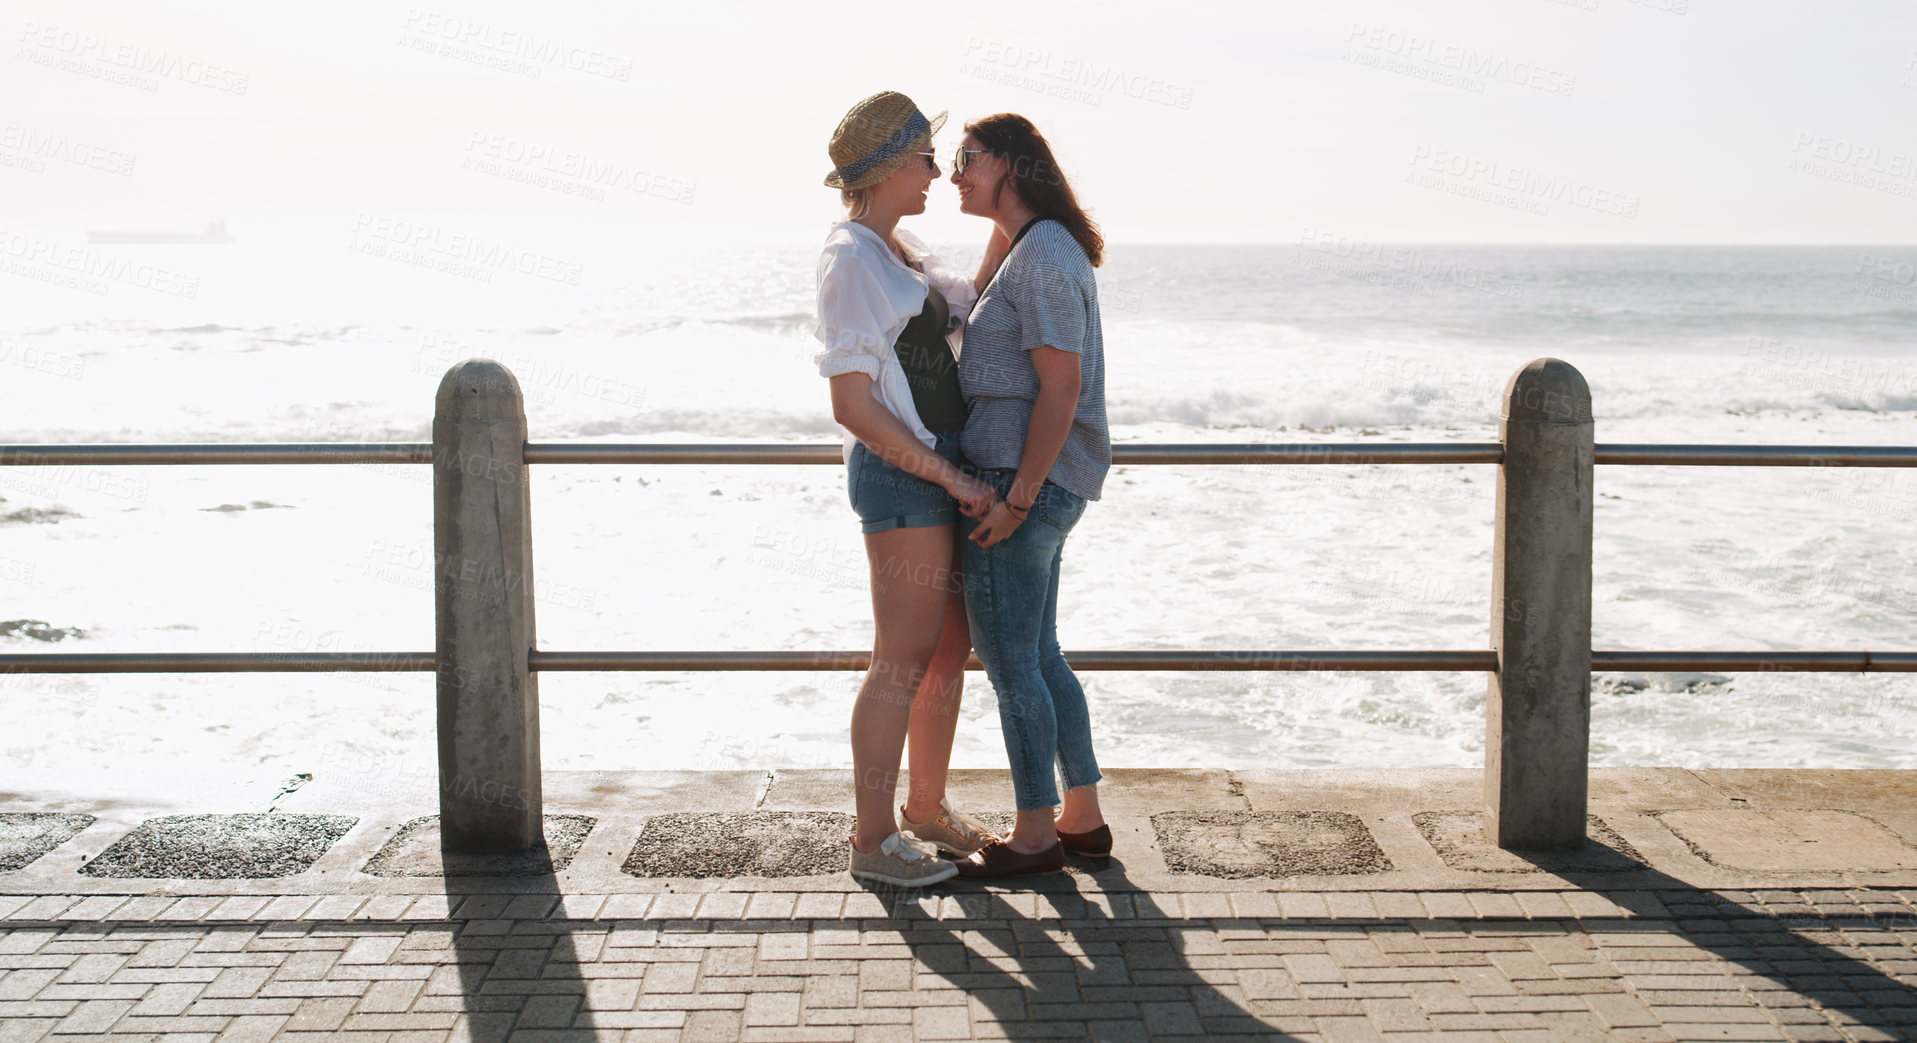 Buy stock photo Full length shot of an affectionate and happy young couple standing together on a promenade near the beach